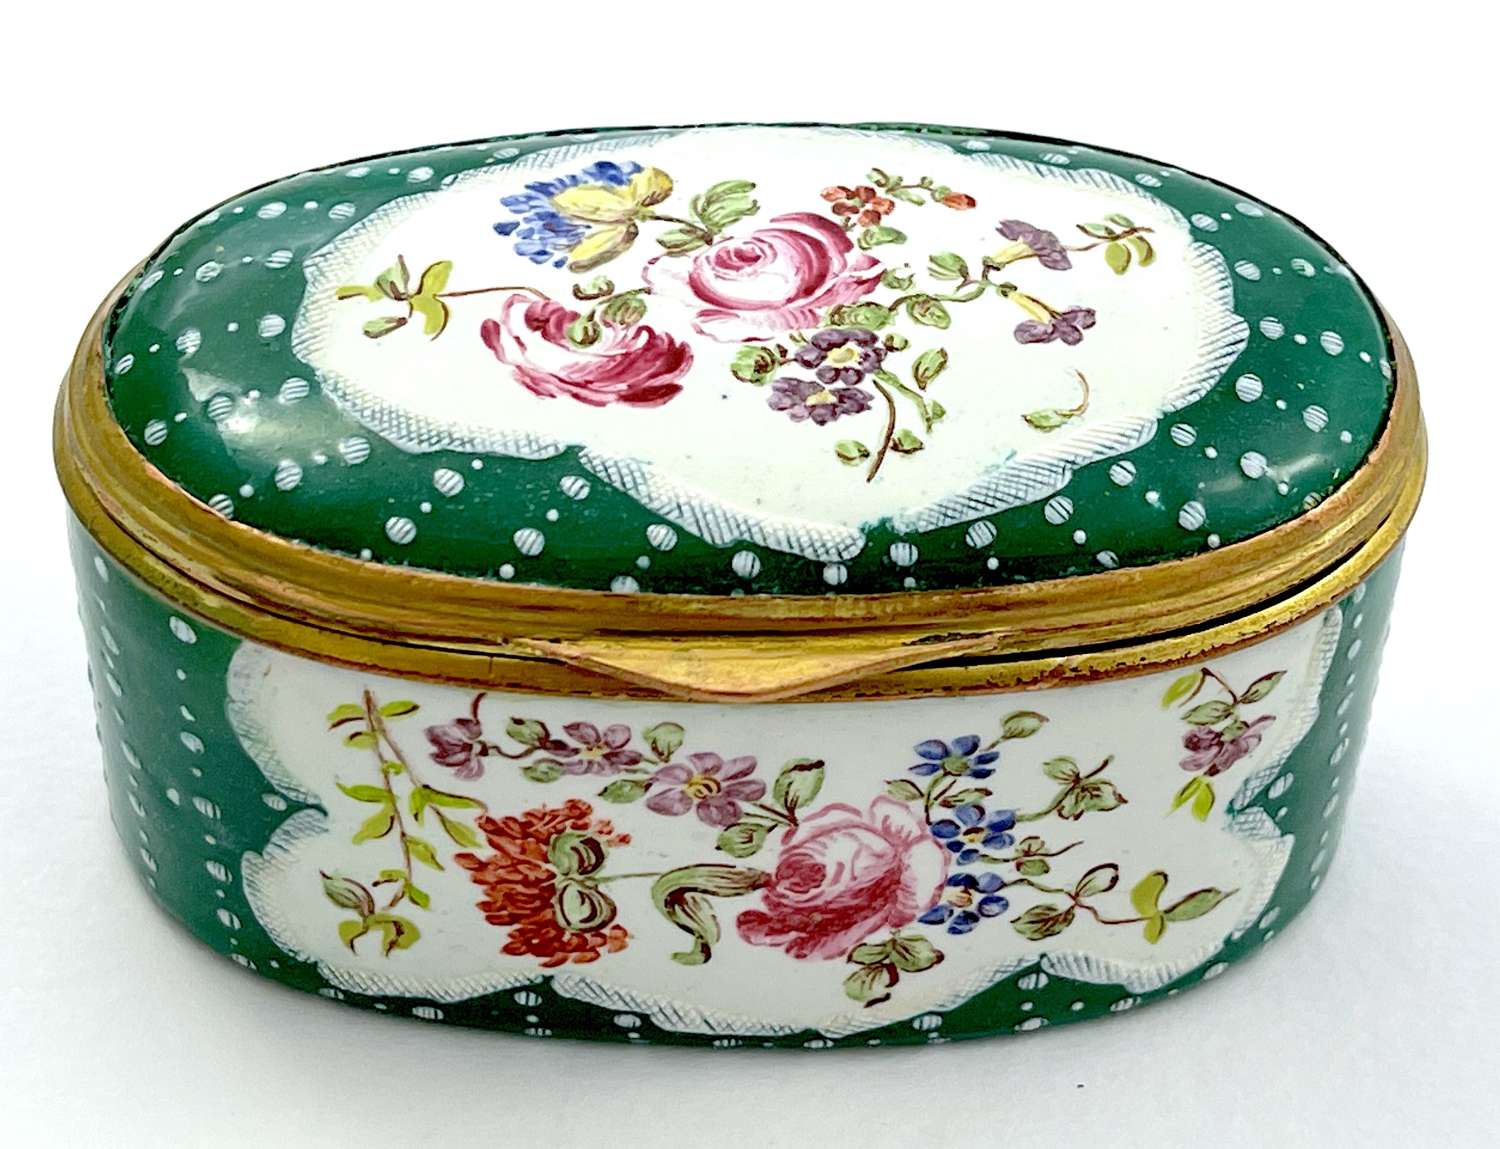 Antique French Miniature Porcelain Box Decorated with Flowers